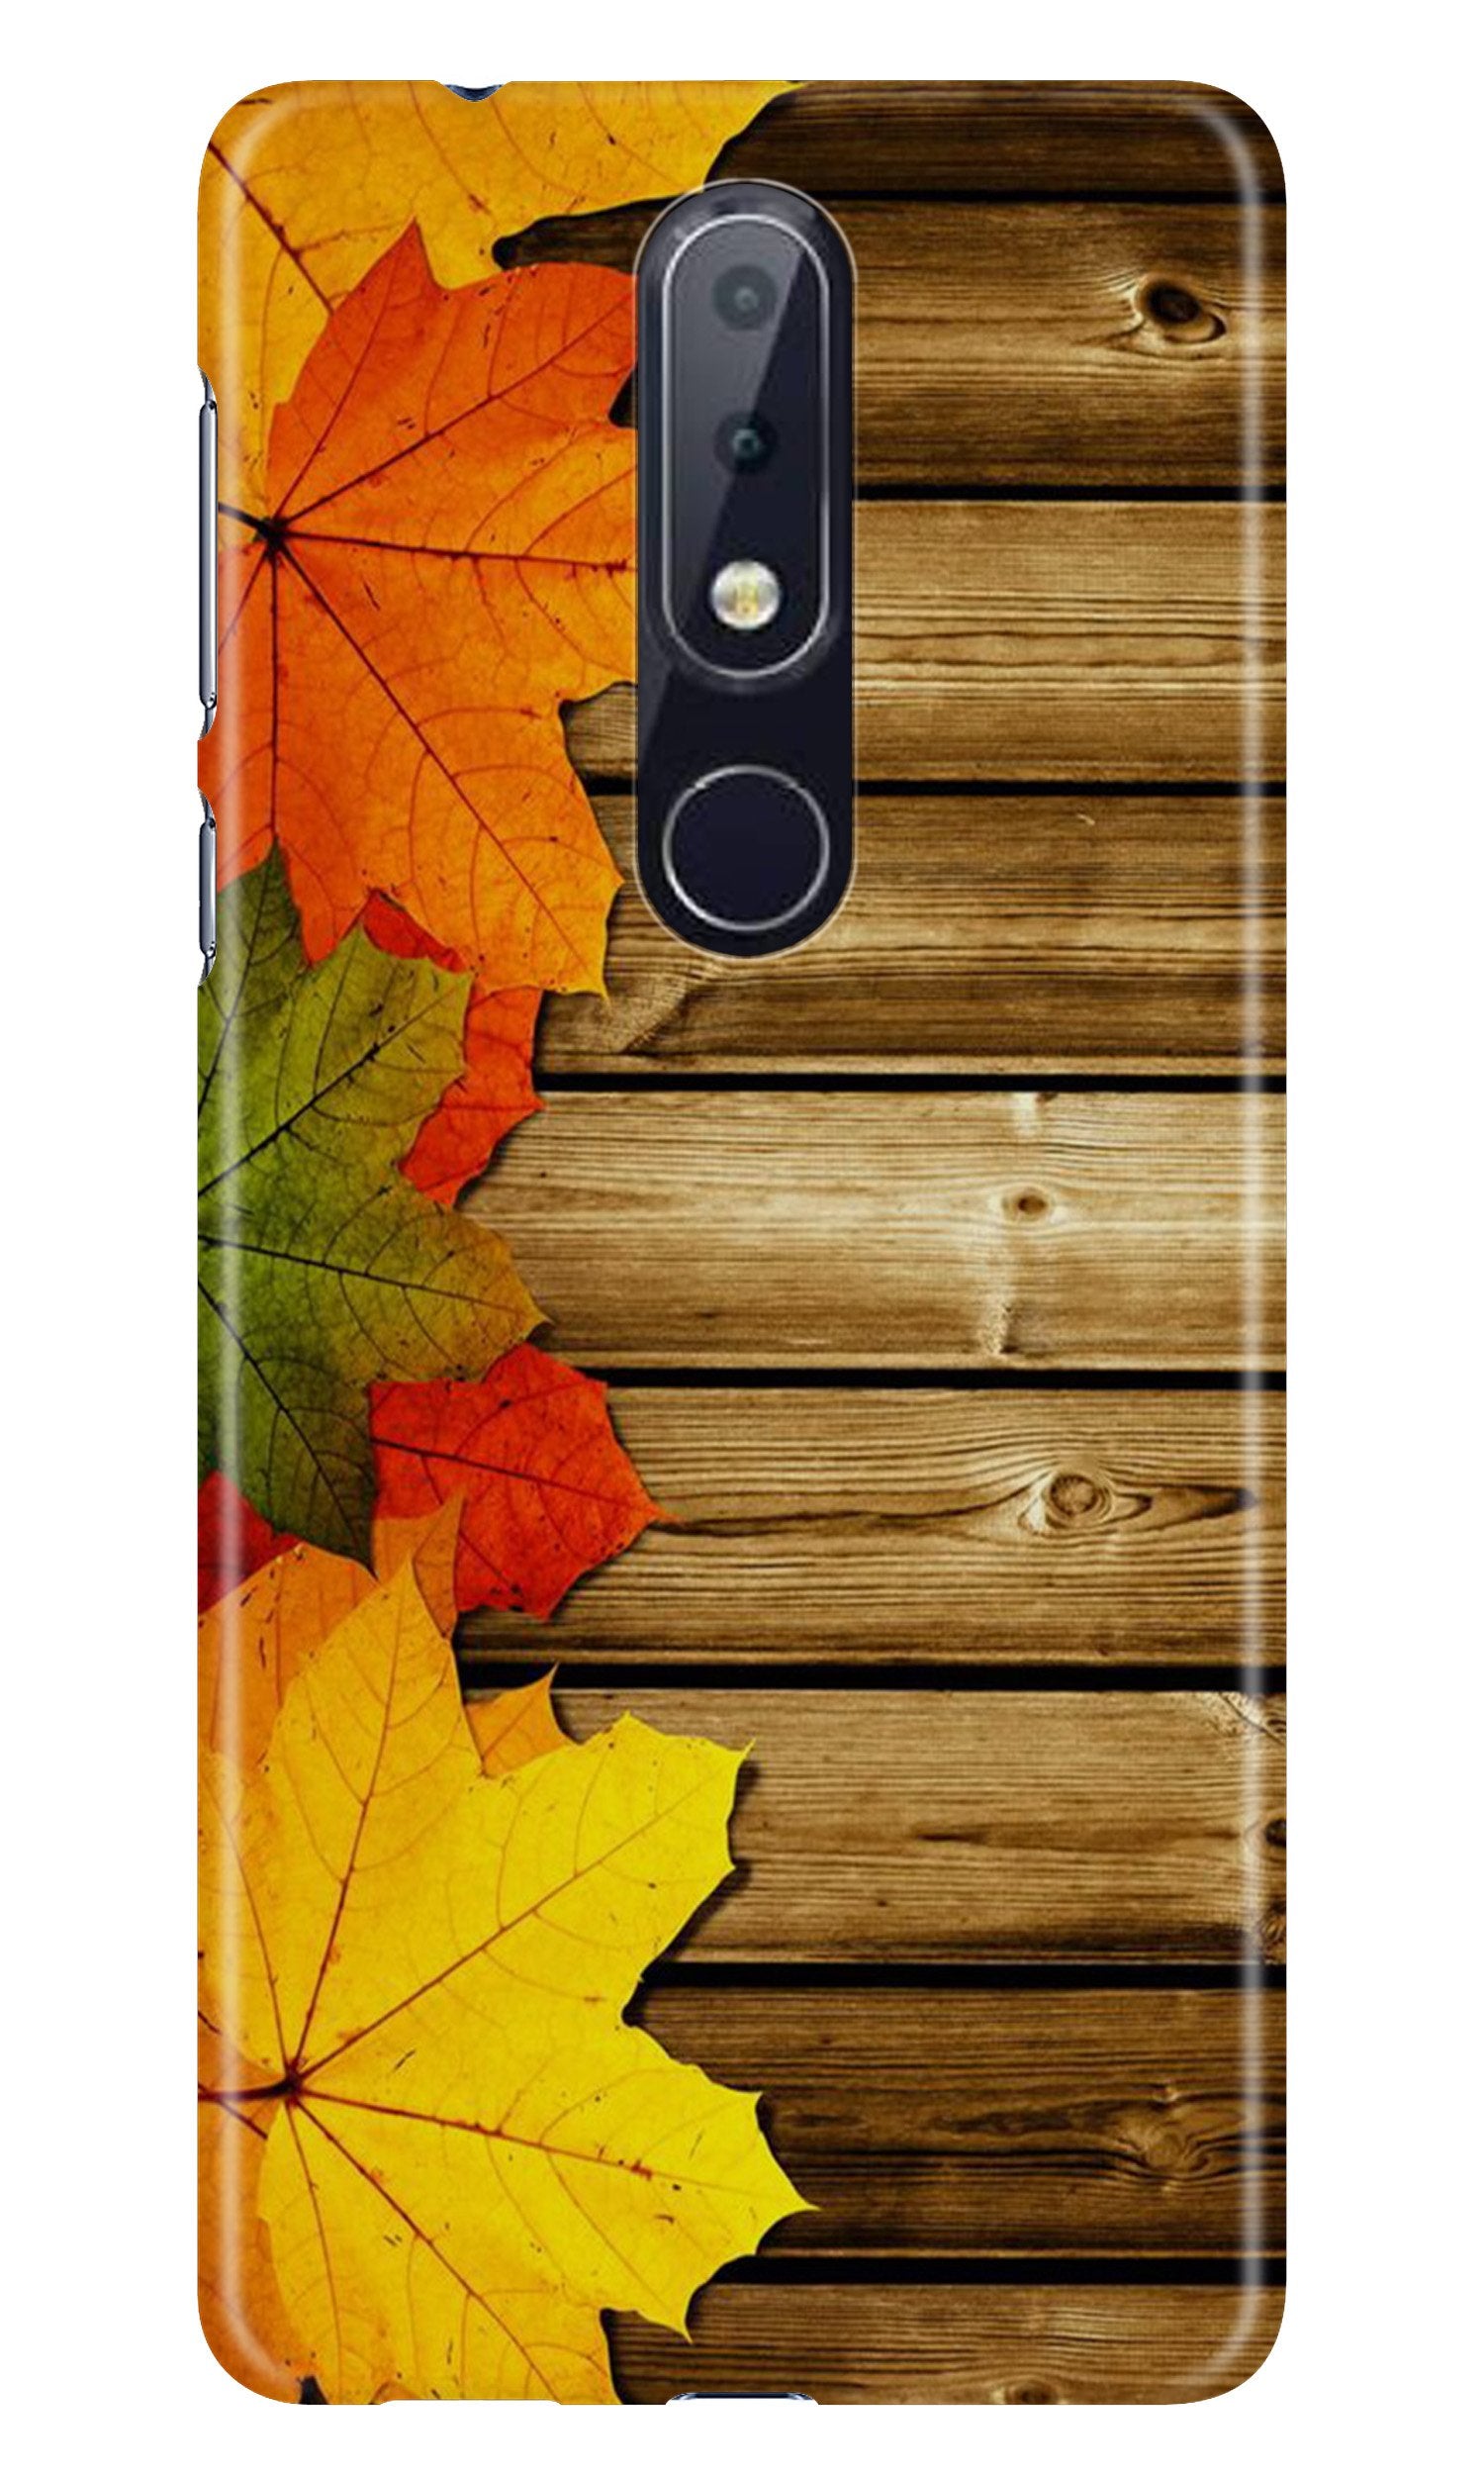 Wooden look3 Case for Nokia 6.1 Plus